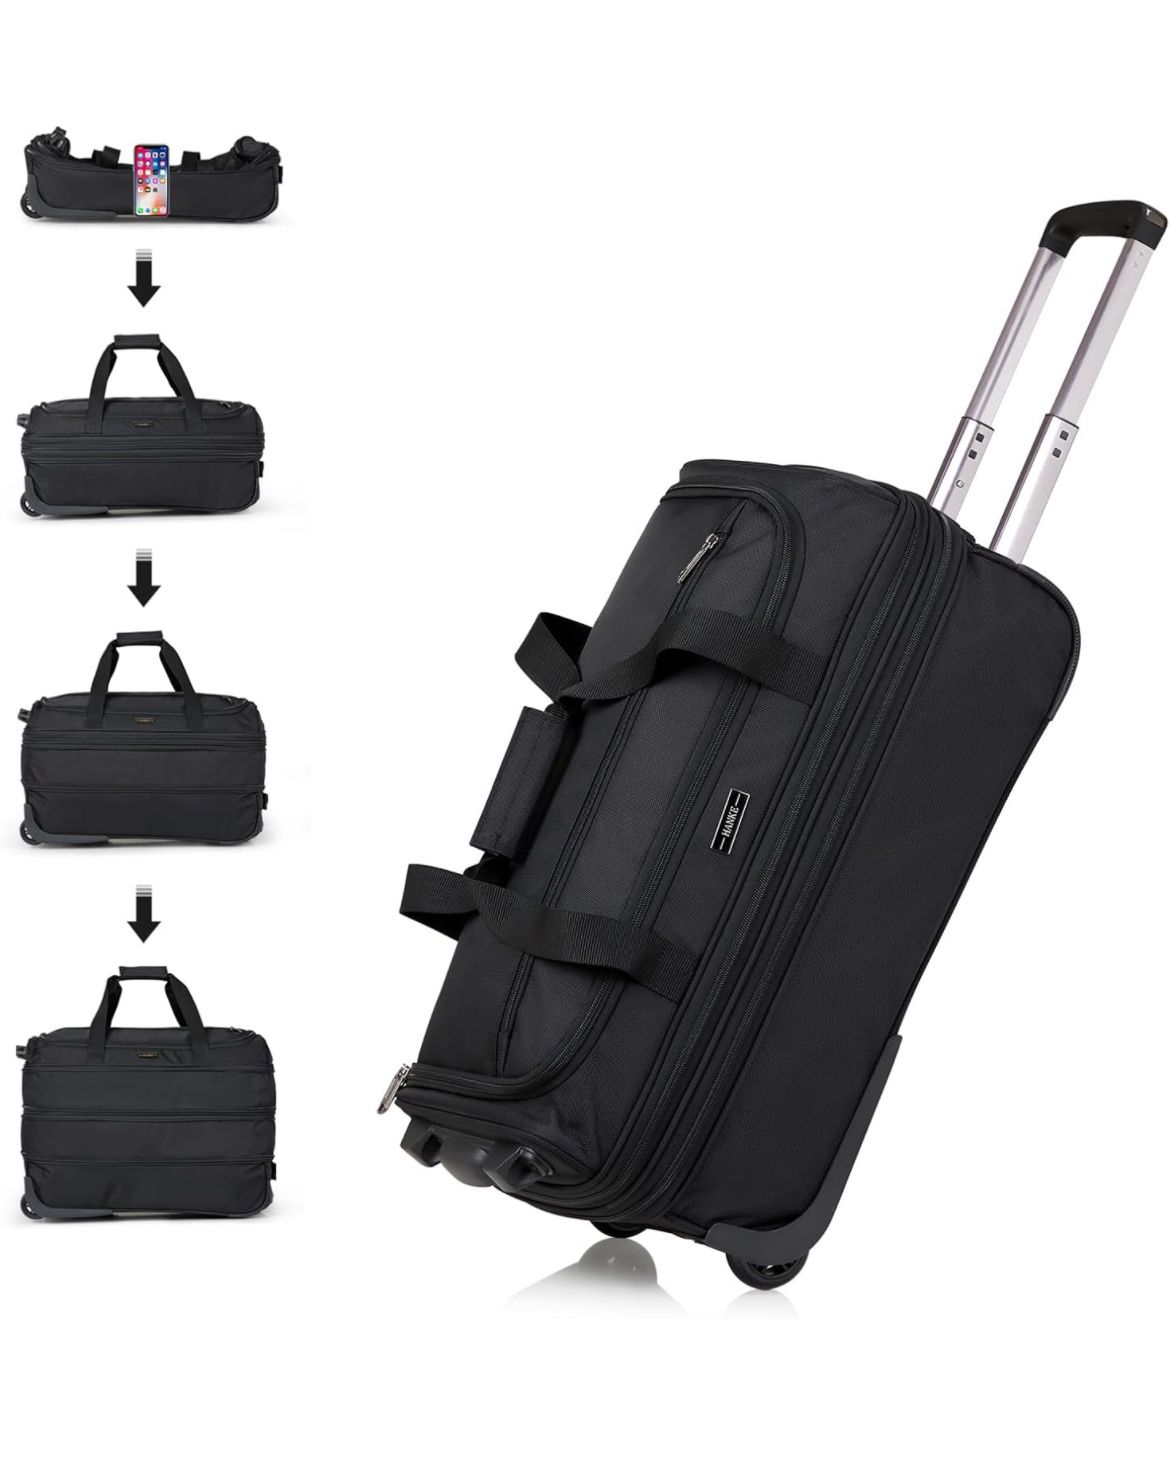 Hanke 20 Inch Expandable Carry On Luggage Suitcases with Wheels Foldable Duffle Bag for Travel Carry On suitcase Weekend Bag for Women Men Garment Bag